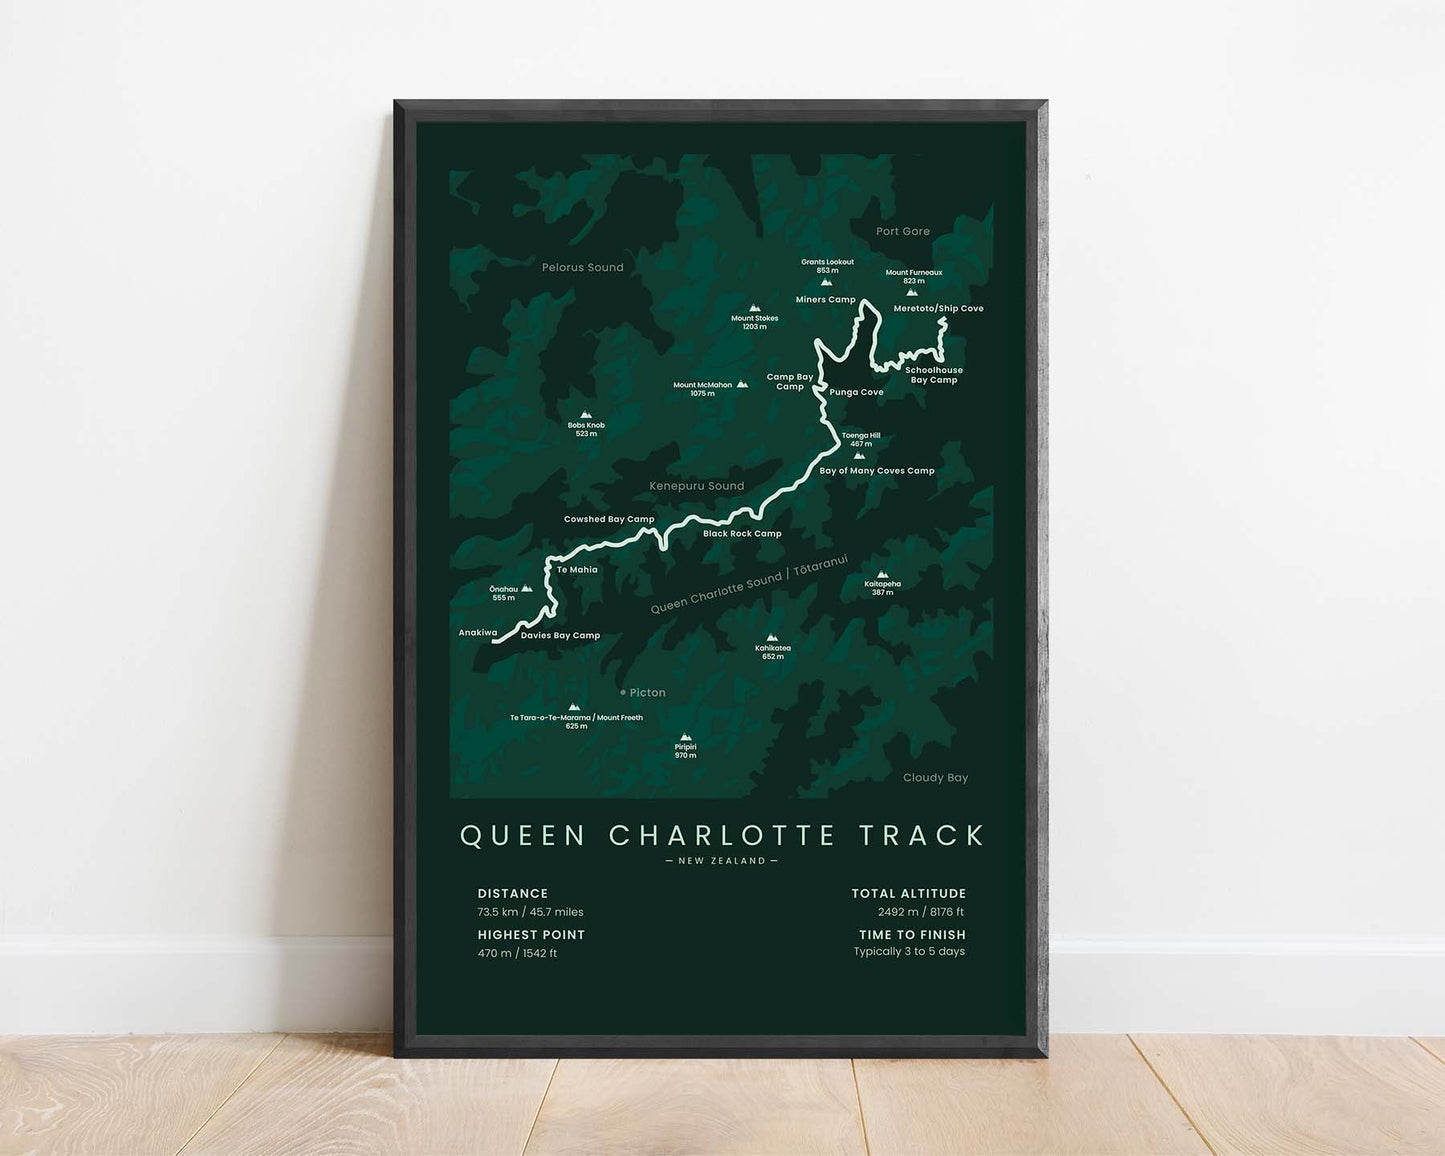 Queen Charlotte Walkway (Marlborough Sounds, Queen Charlotte Sound, Anakiwa, Kenepuru Sound, New Zealand) Track Map Art with Green Background